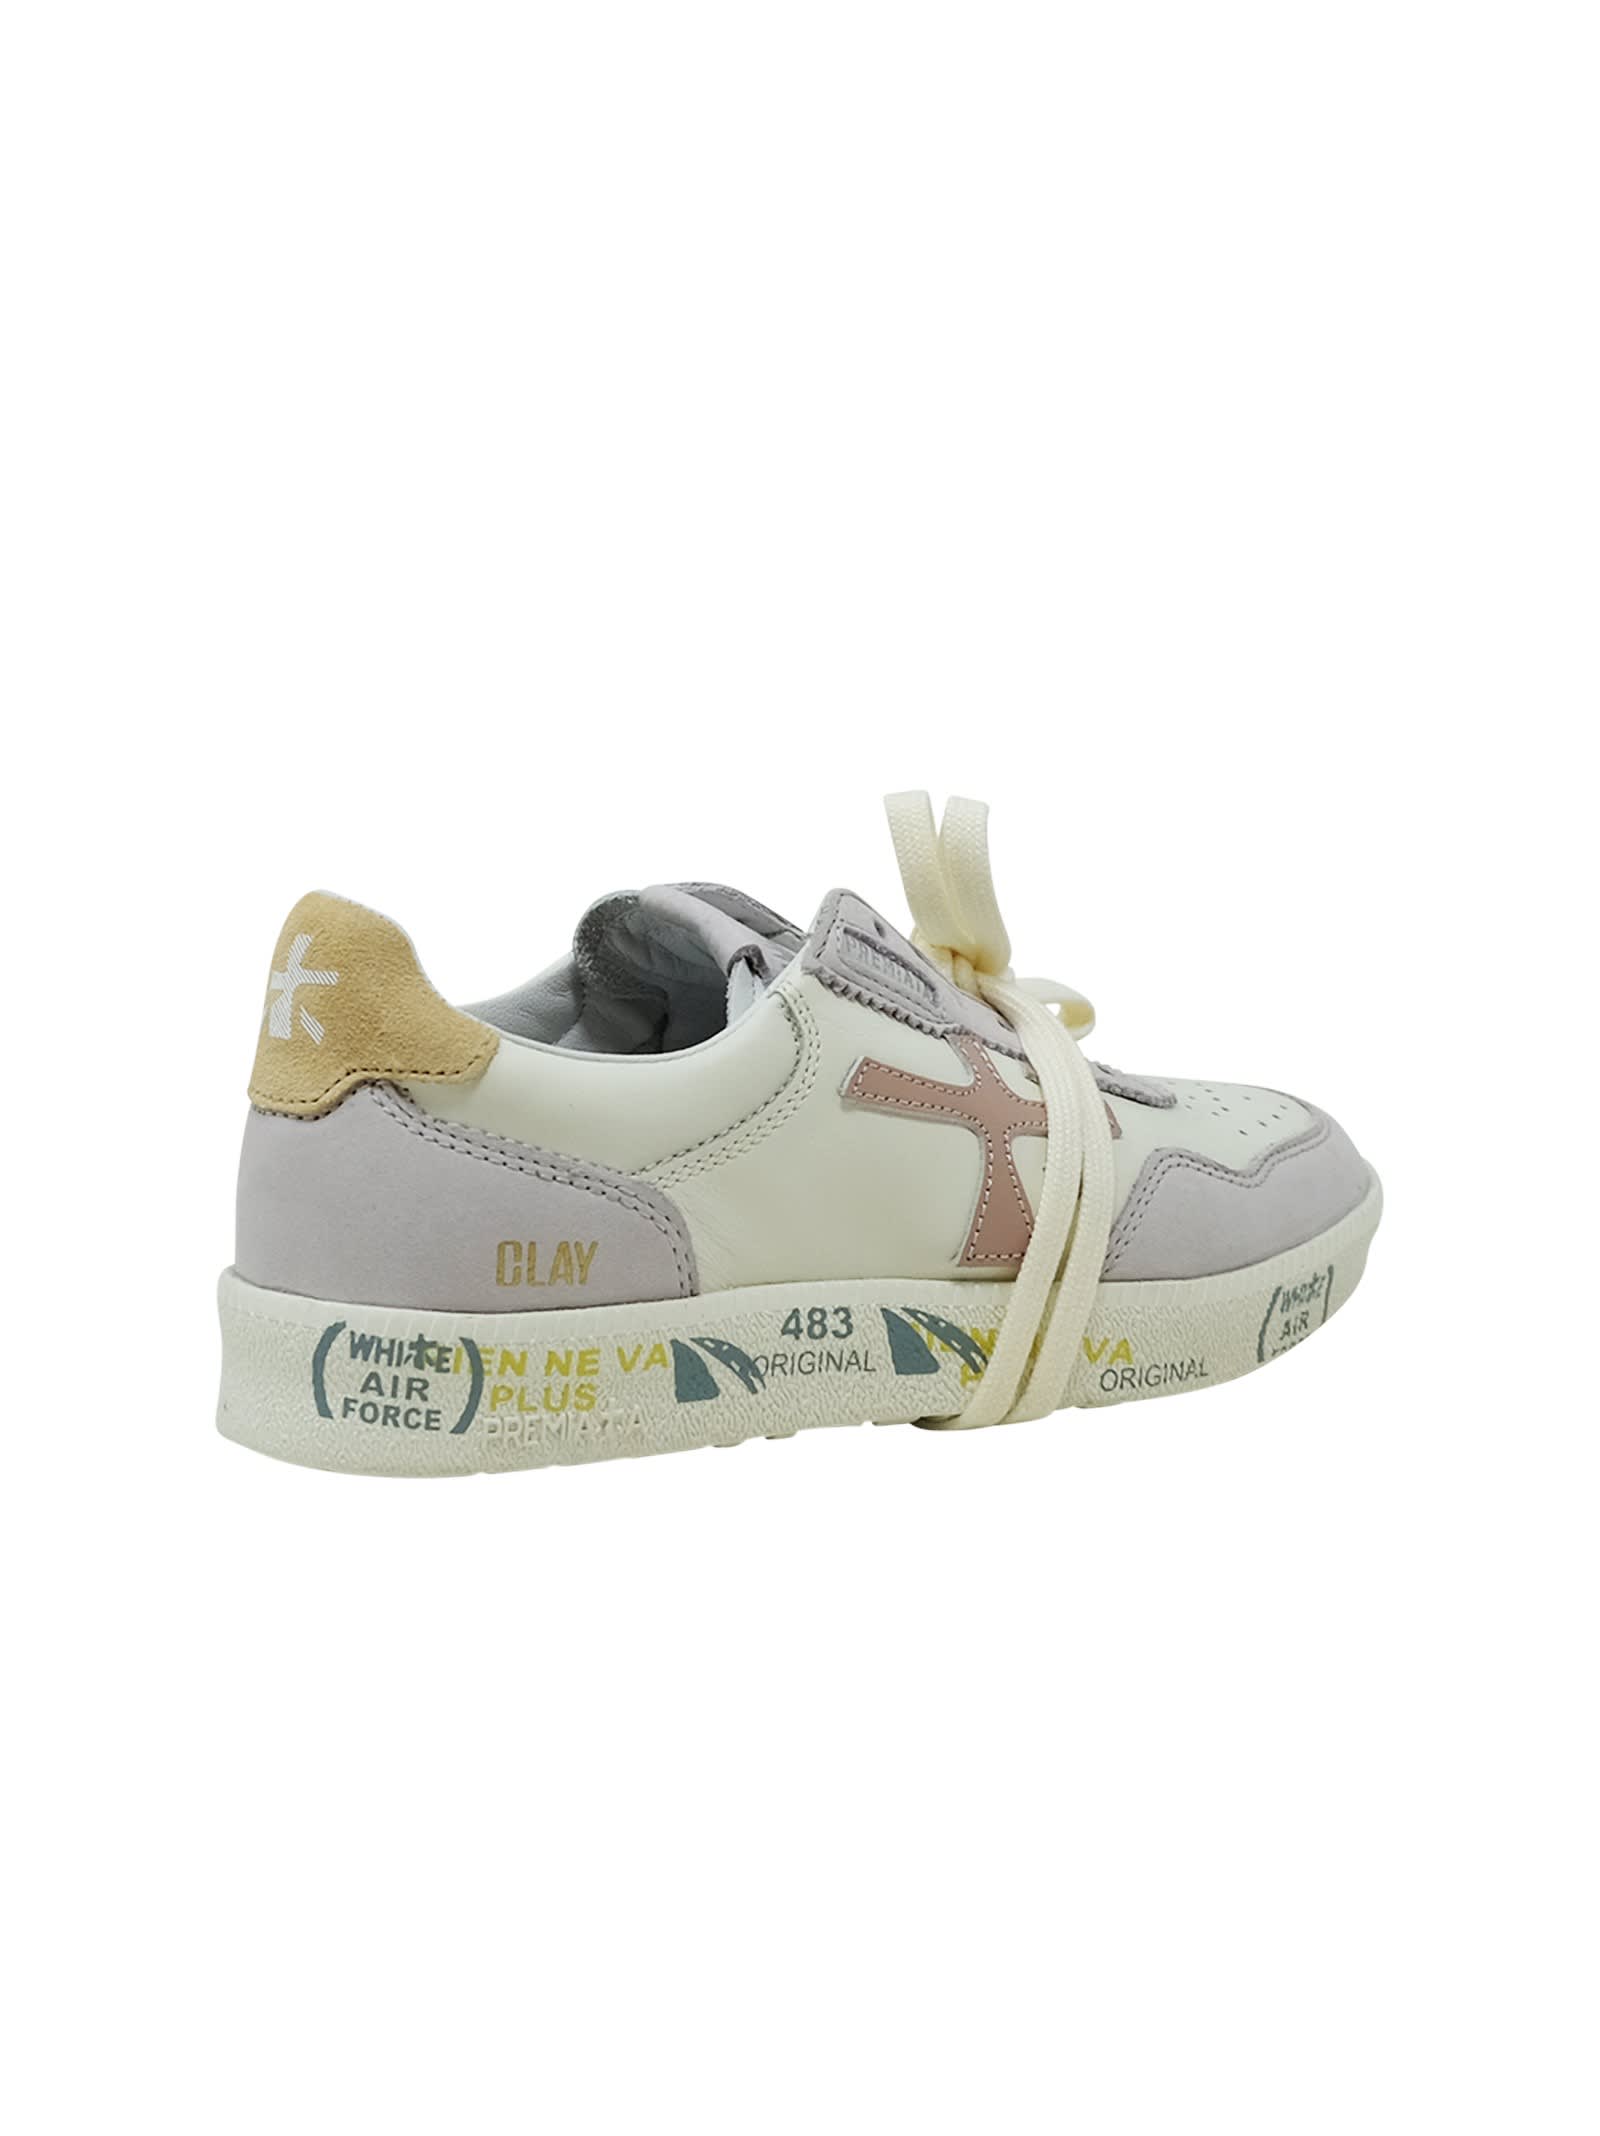 Shop Premiata Clayd White And Lilac Leather Sneakers